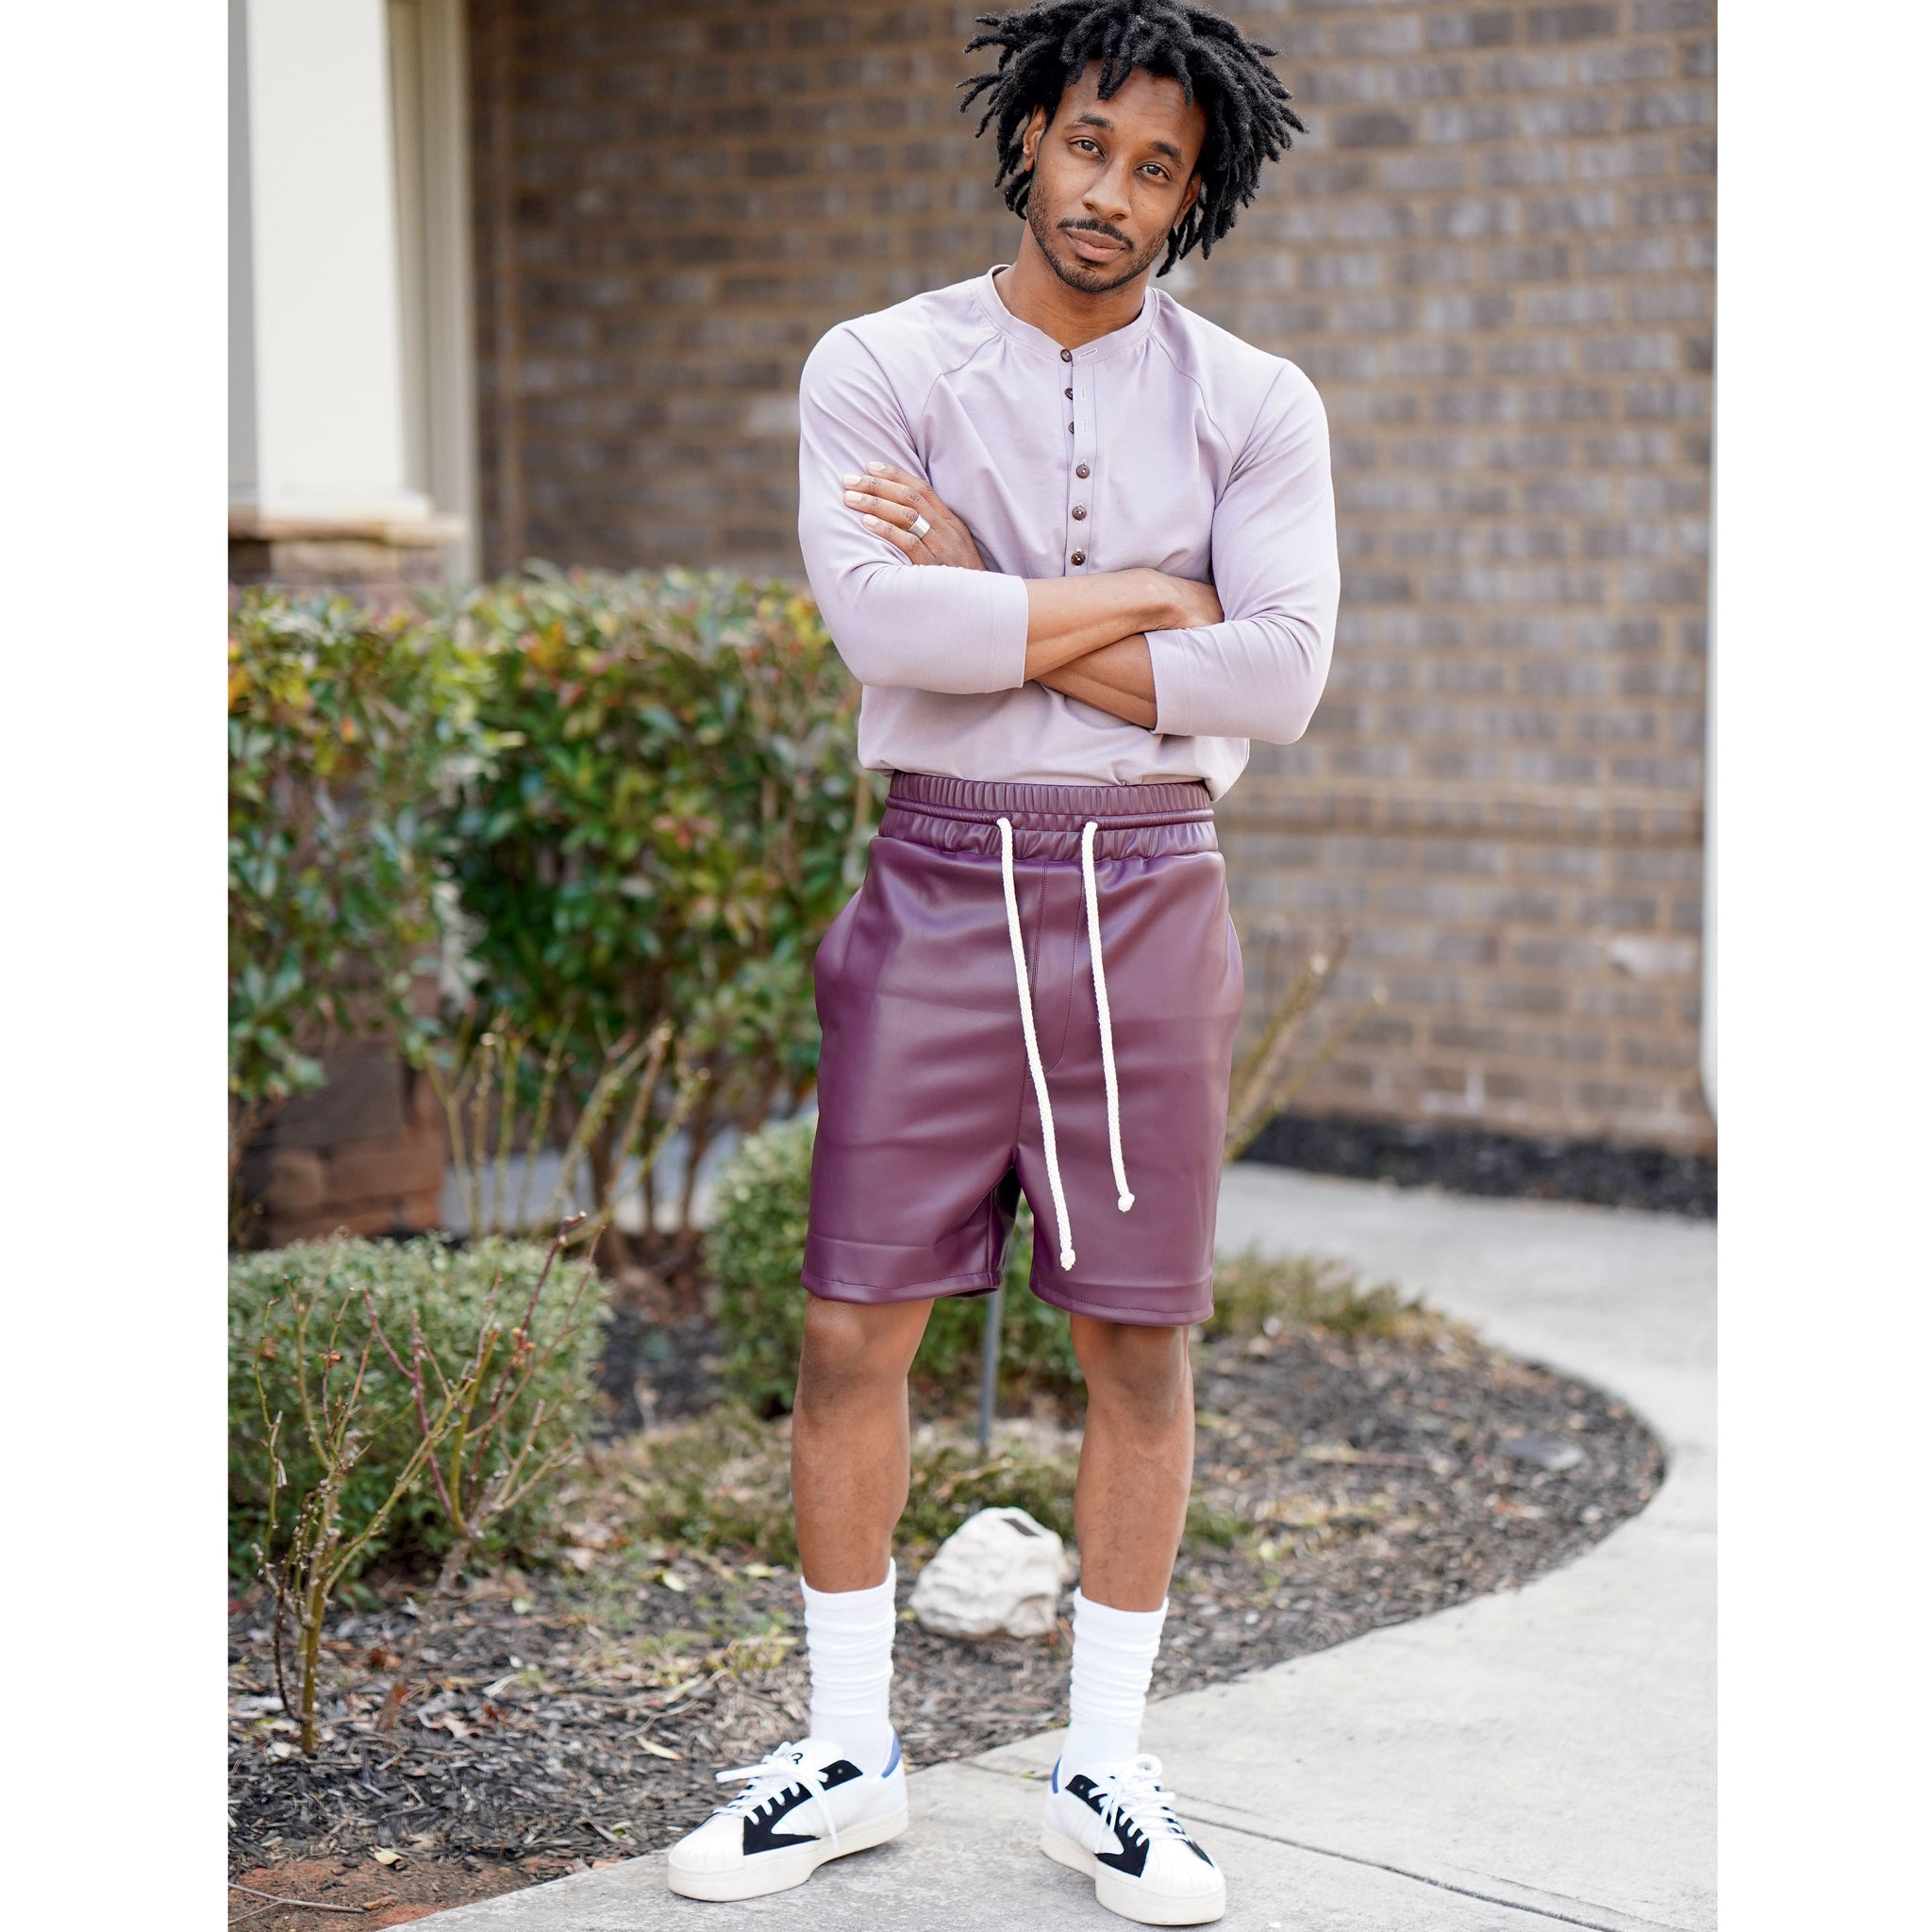 Simplicity Mens Pull on Pants or Shorts Xs S M L XL